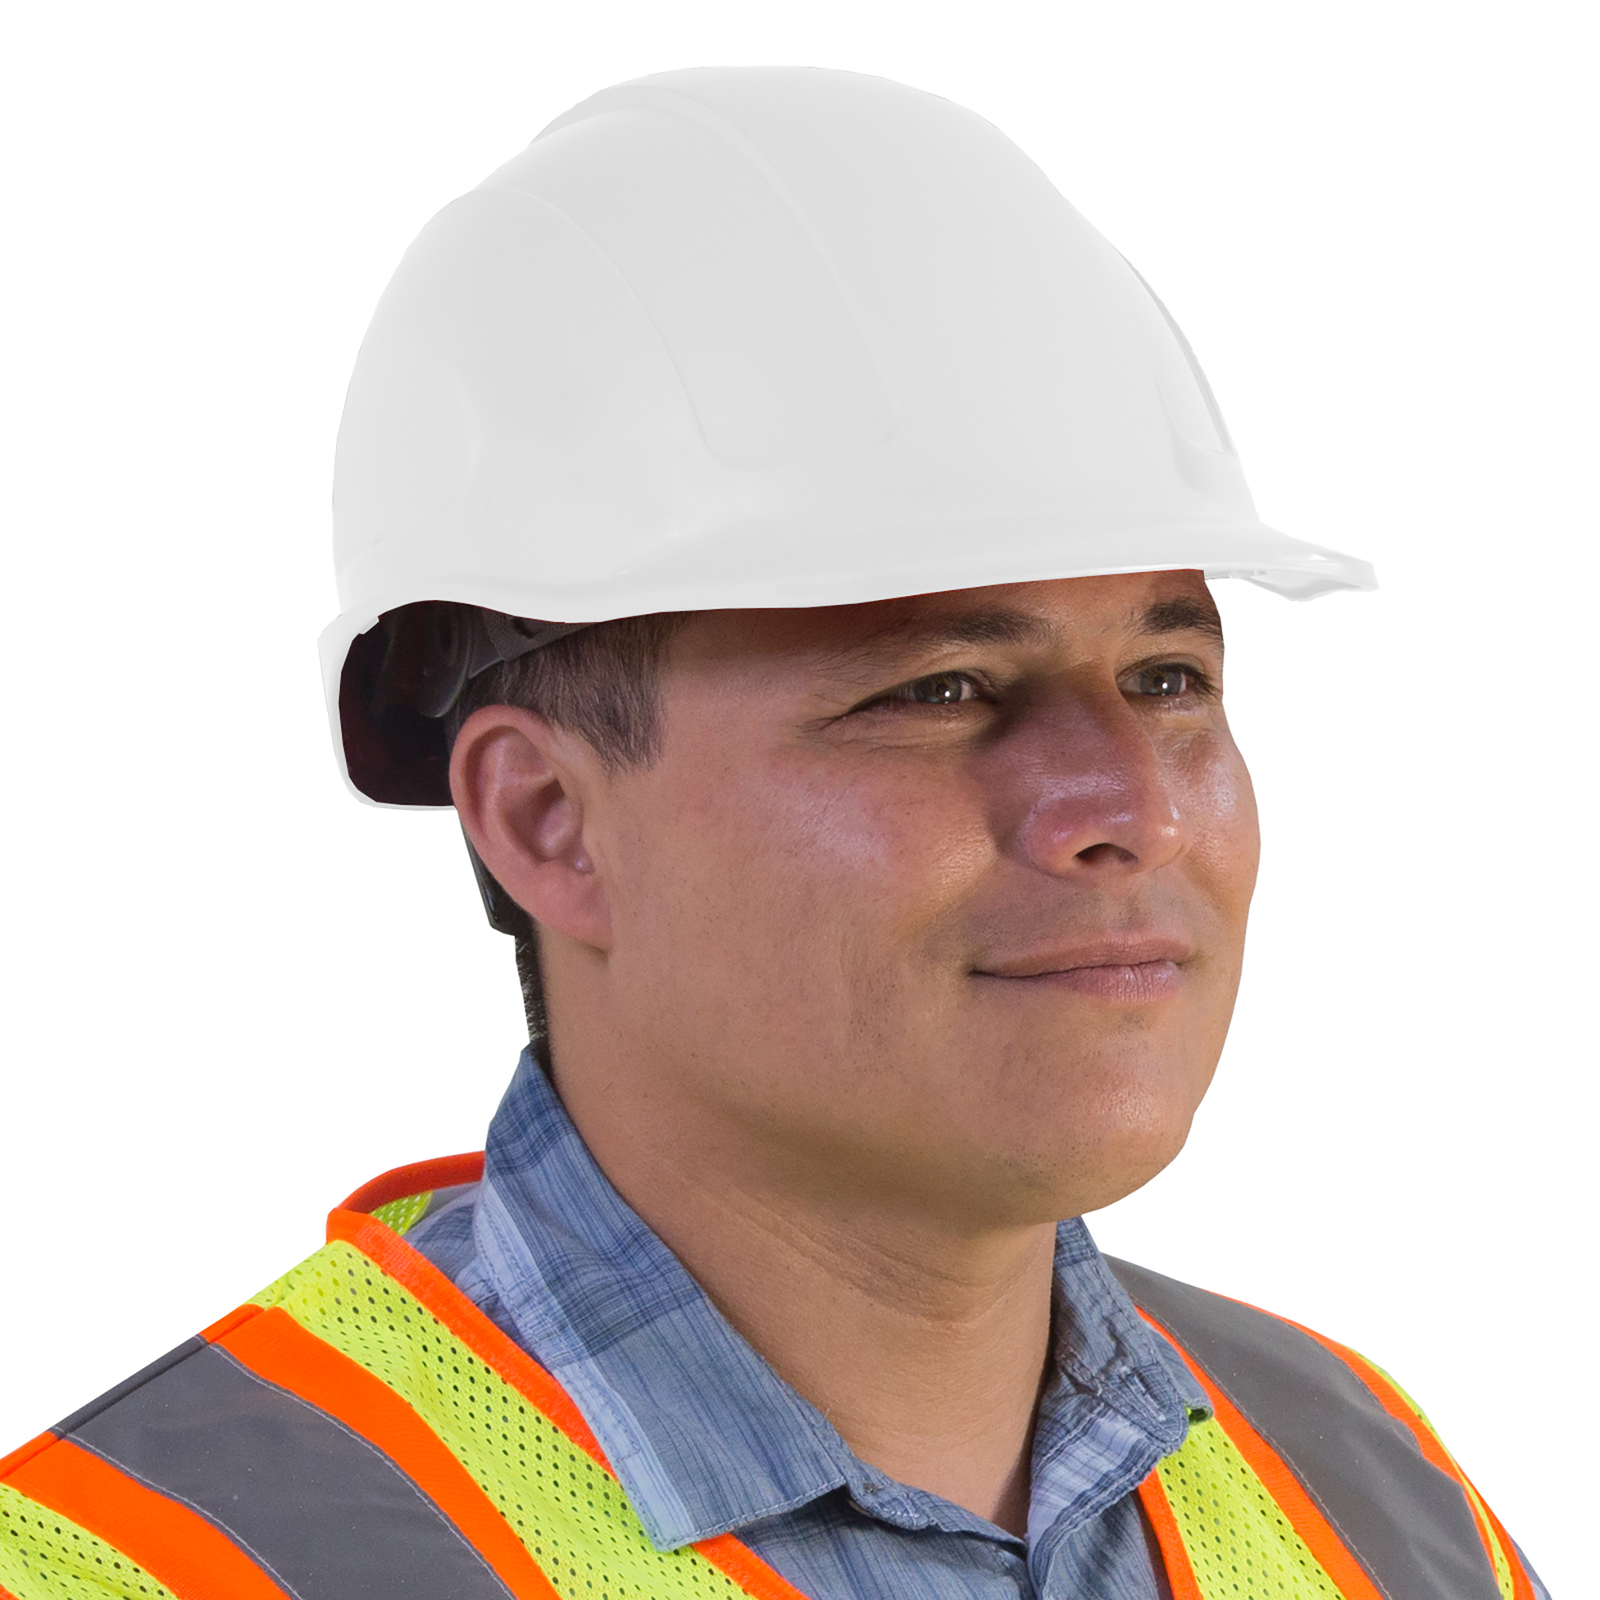 A worker wearing a white cap style safety hard hat